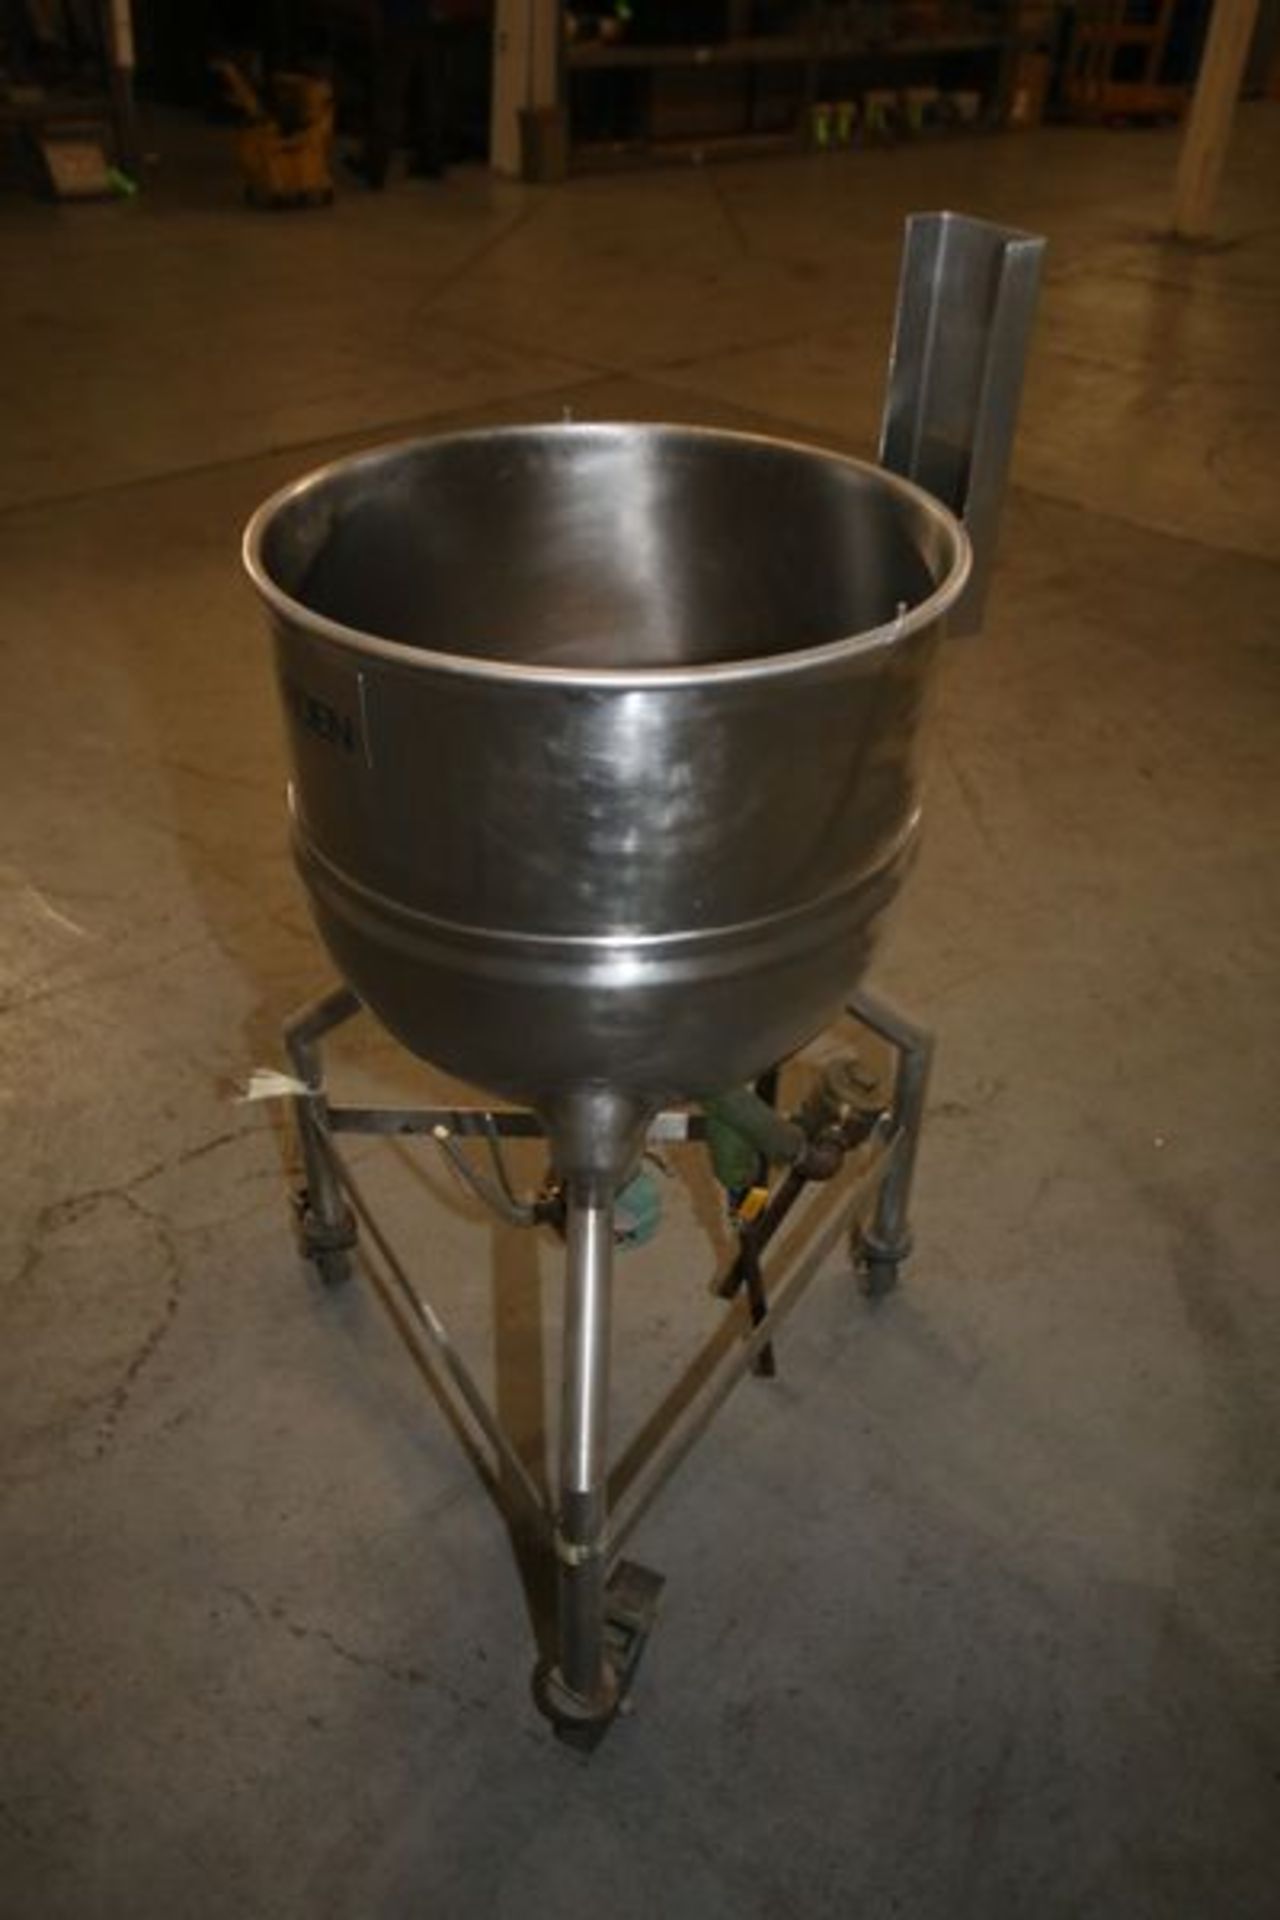 Greon Aprox. 20 Gal. S/S Jacketed Kettle, M/N N-20, S/N 31665-1, National Board: 133241, 100 PSI @ - Image 3 of 5